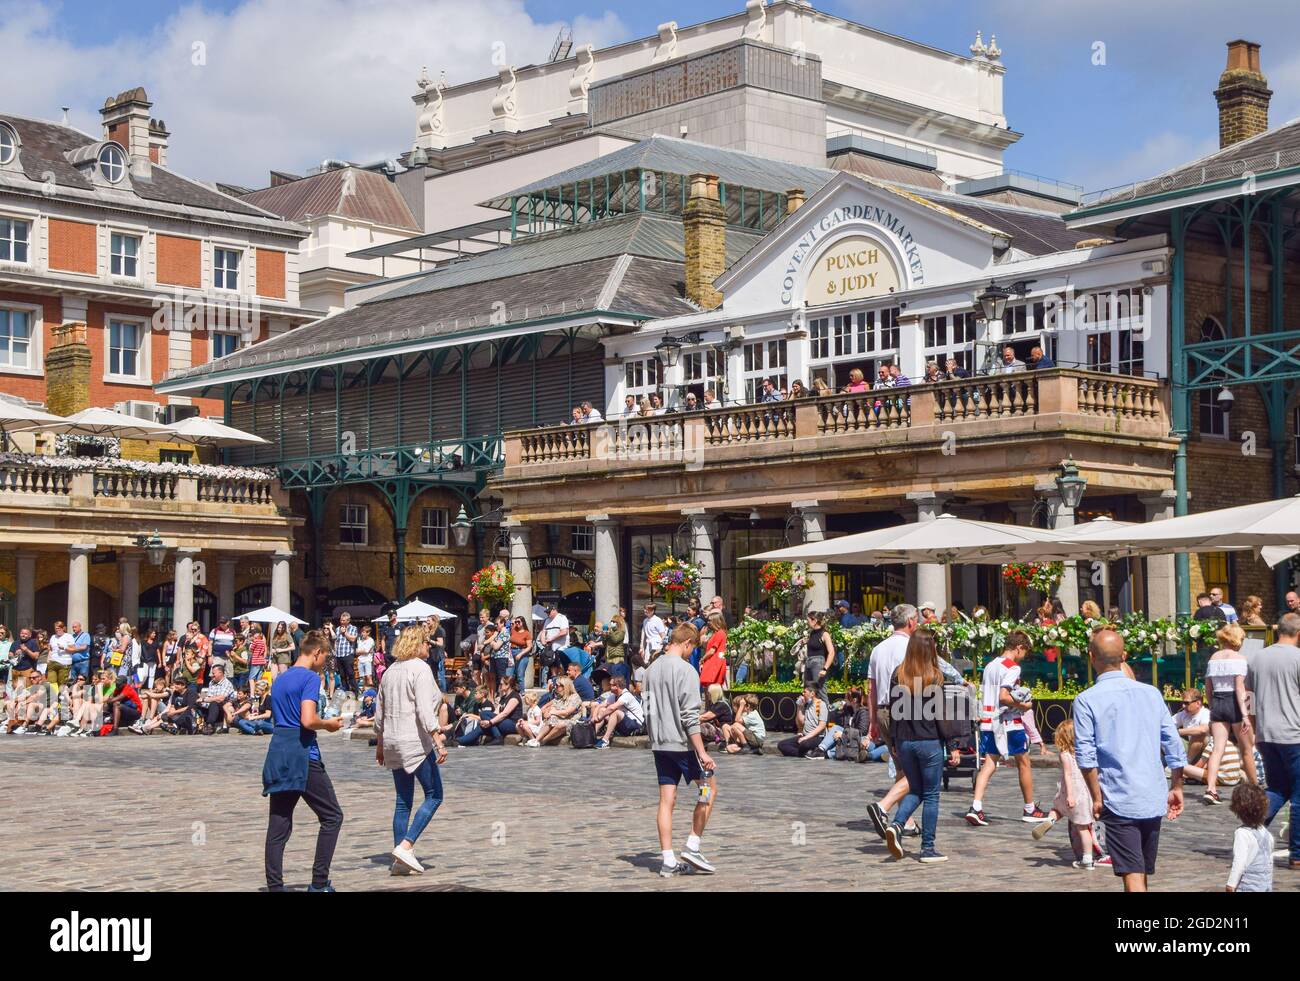 London, United Kingdom. 10th August 2021. Crowds in Covent Garden. London landmarks have been busy again, as tourists return to the capital following the relaxation of coronavirus restrictions and quarantine rules in England over the past few weeks. (Credit: Vuk Valcic / Alamy Live News) Stock Photo